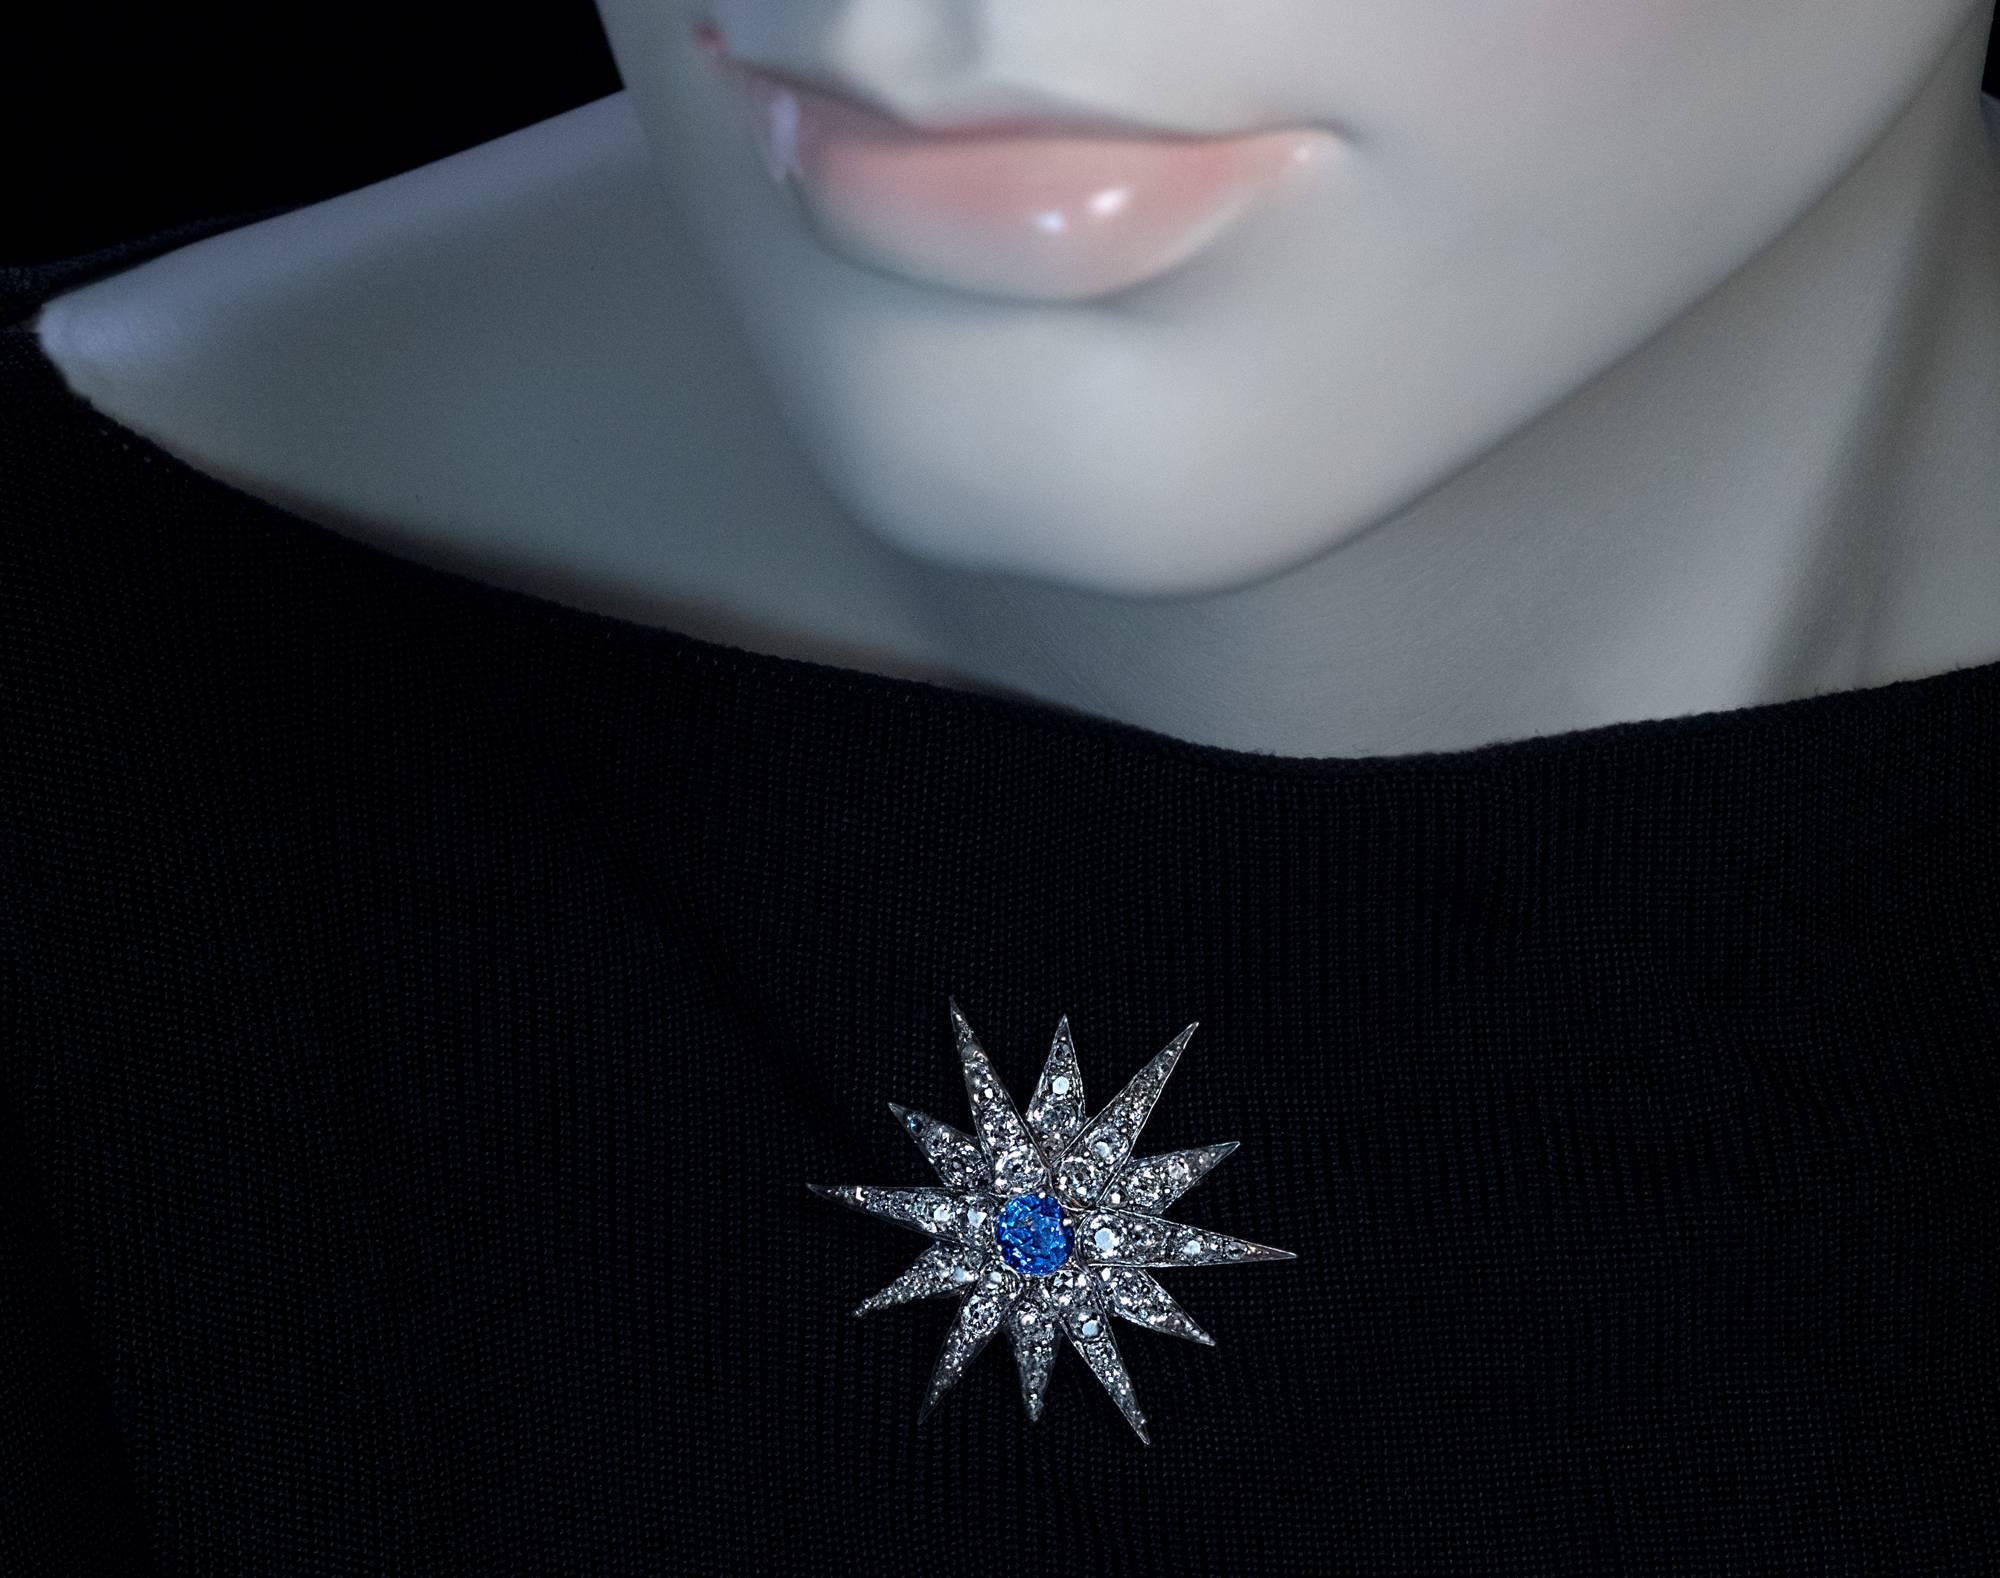 Russian hallmarks, made between 1899 and 1908

The twelve pointed star with a raised center is handcrafted in silver and gold.

The star is centered with a round blue sapphire (approximately 1.34 ct).  

The rays of the star are densely set